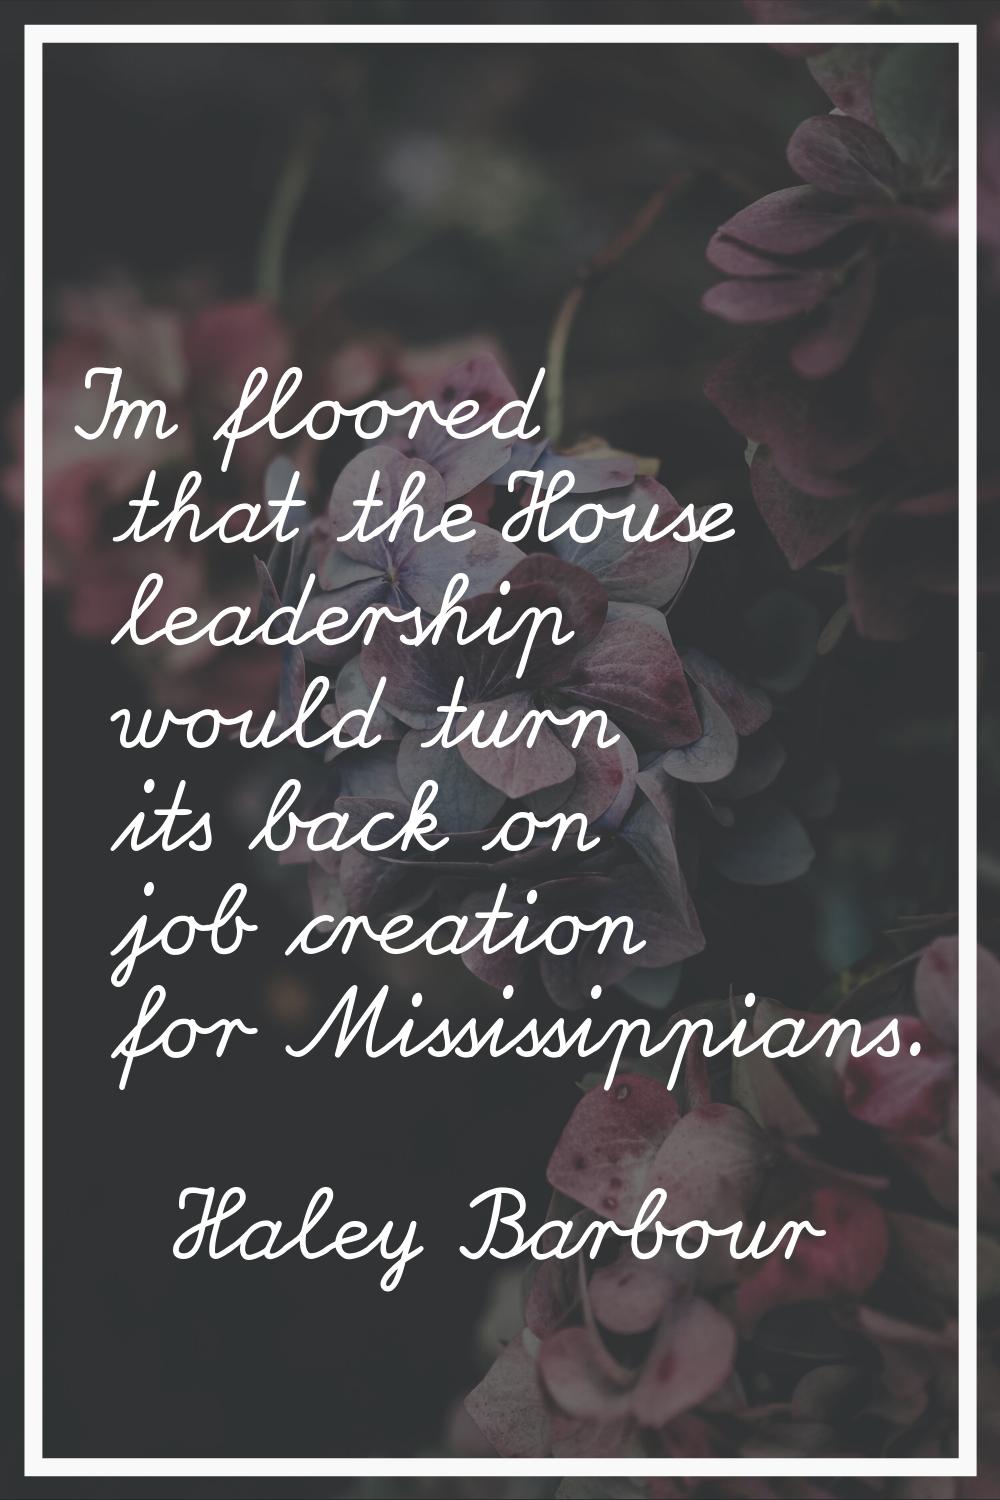 I'm floored that the House leadership would turn its back on job creation for Mississippians.